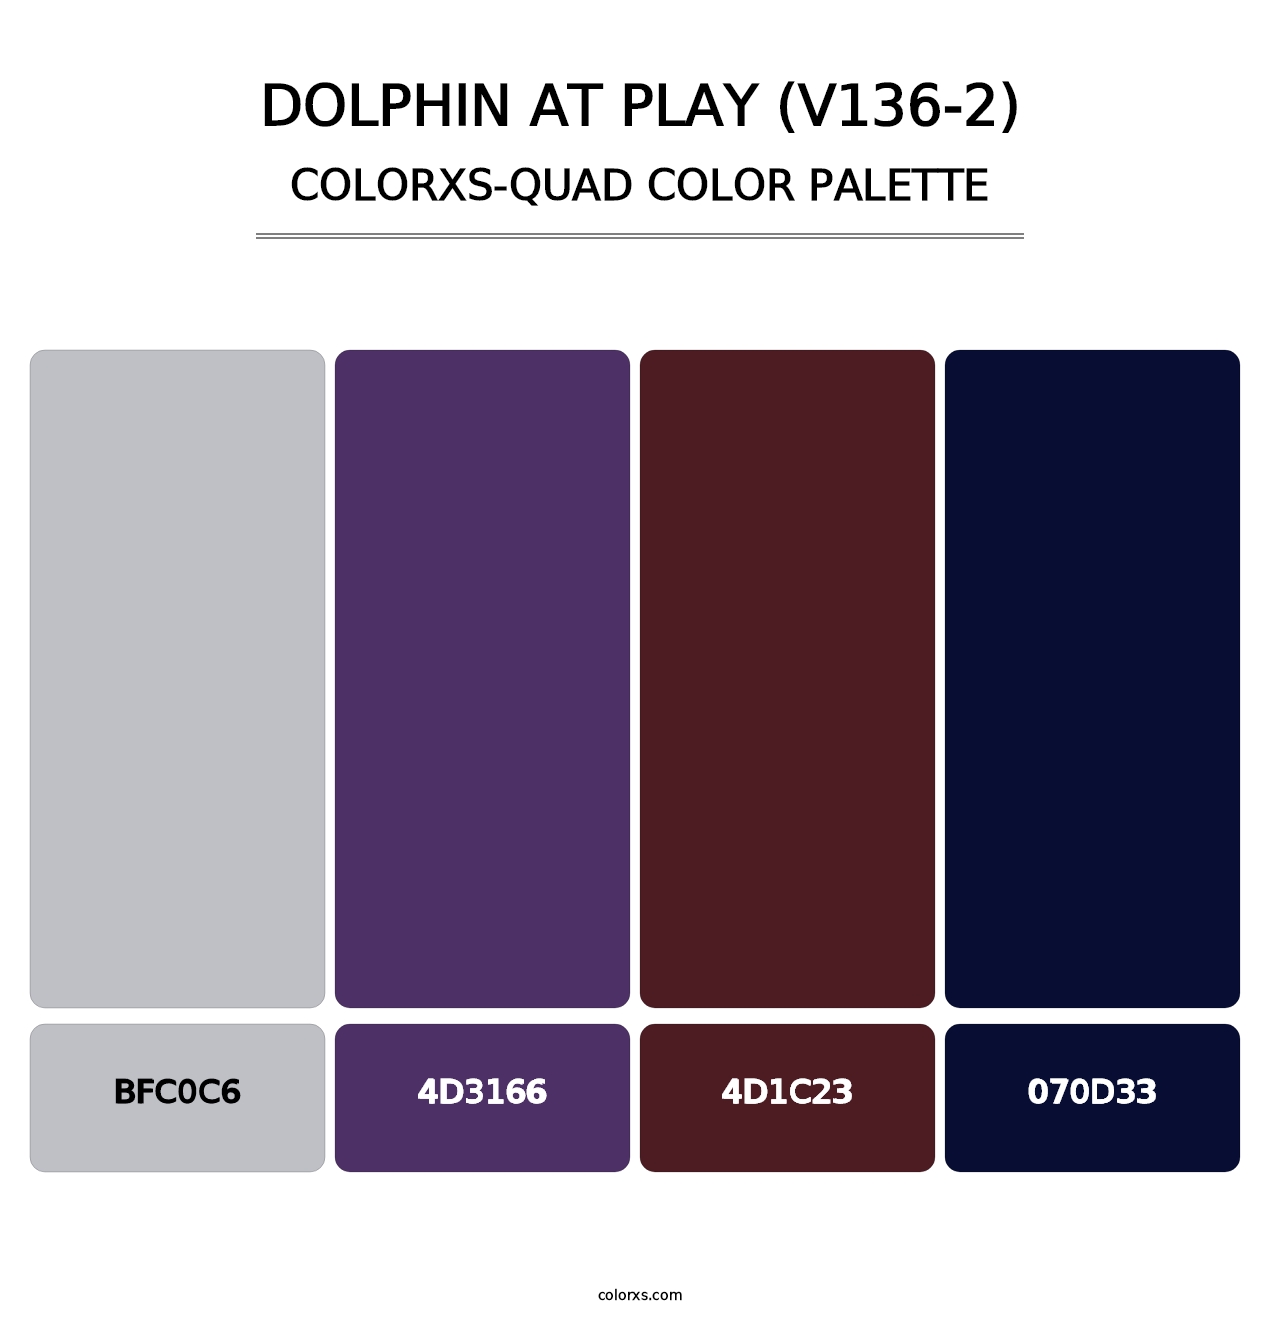 Dolphin at Play (V136-2) - Colorxs Quad Palette